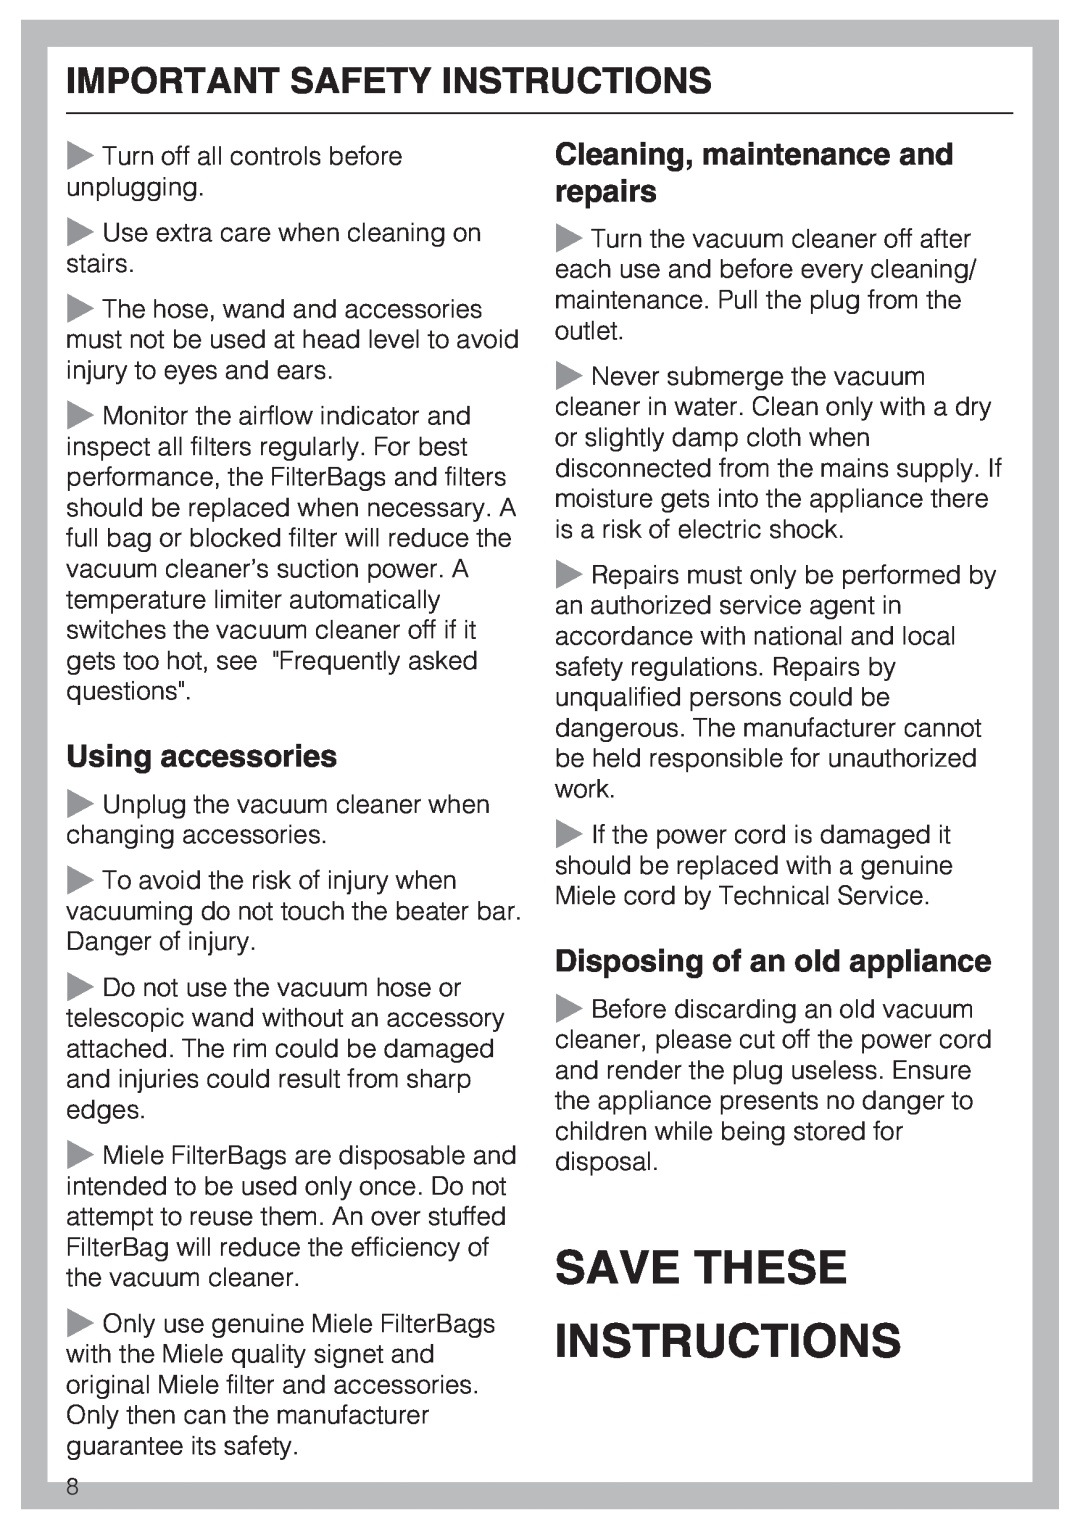 Miele HS08 Save These Instructions, Using accessories, Cleaning, maintenance and repairs, Disposing of an old appliance 